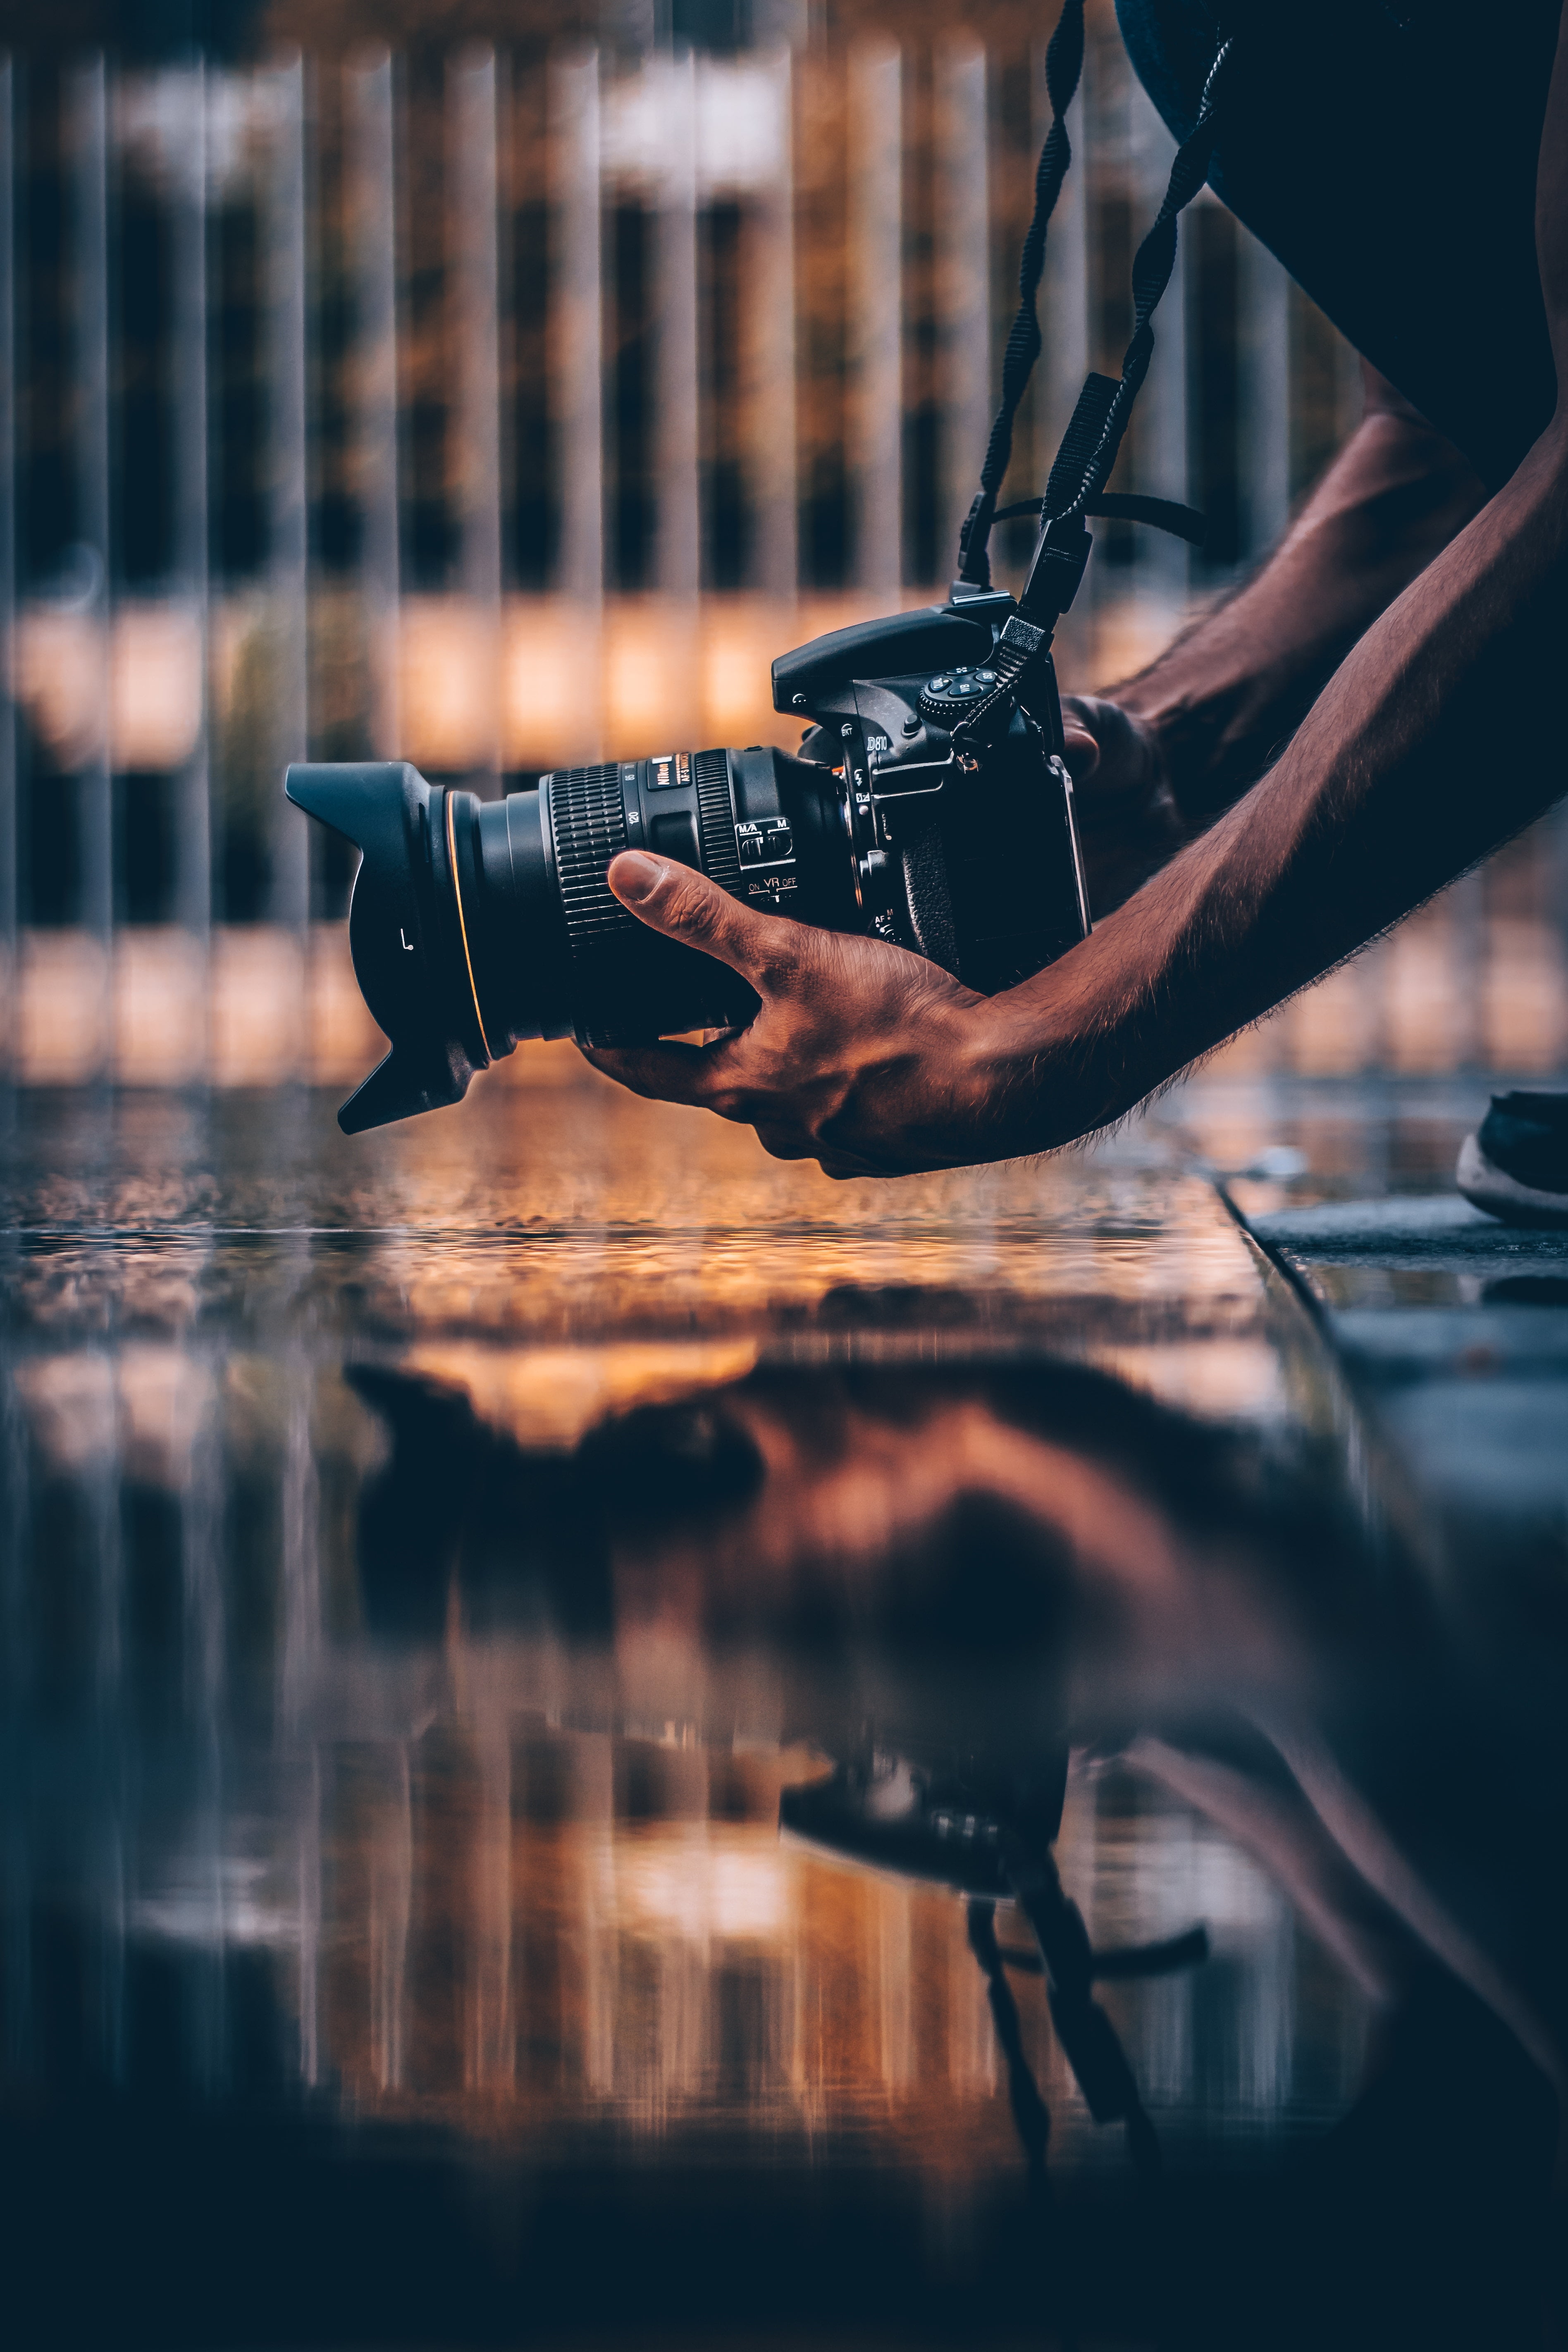 camera, photographer, hands, hobby, reflection, one person